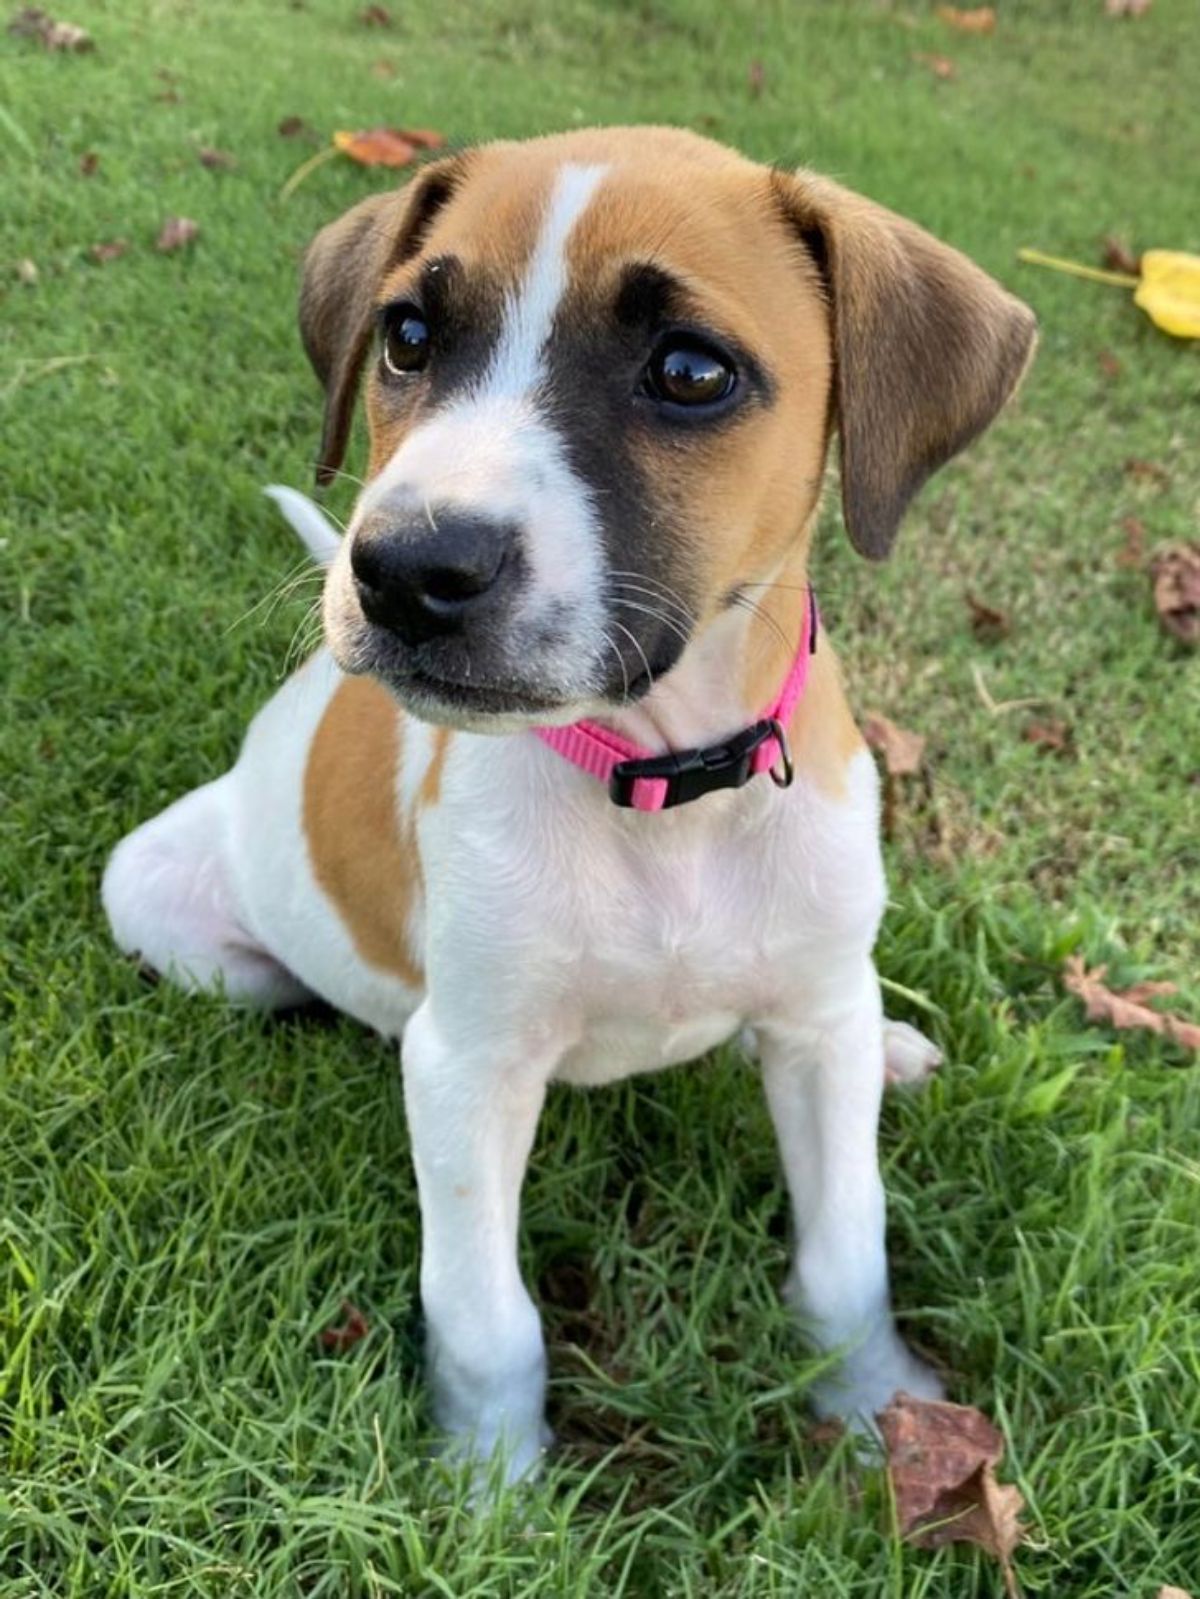 white brown and black puppy in a pink collar sitting on grass